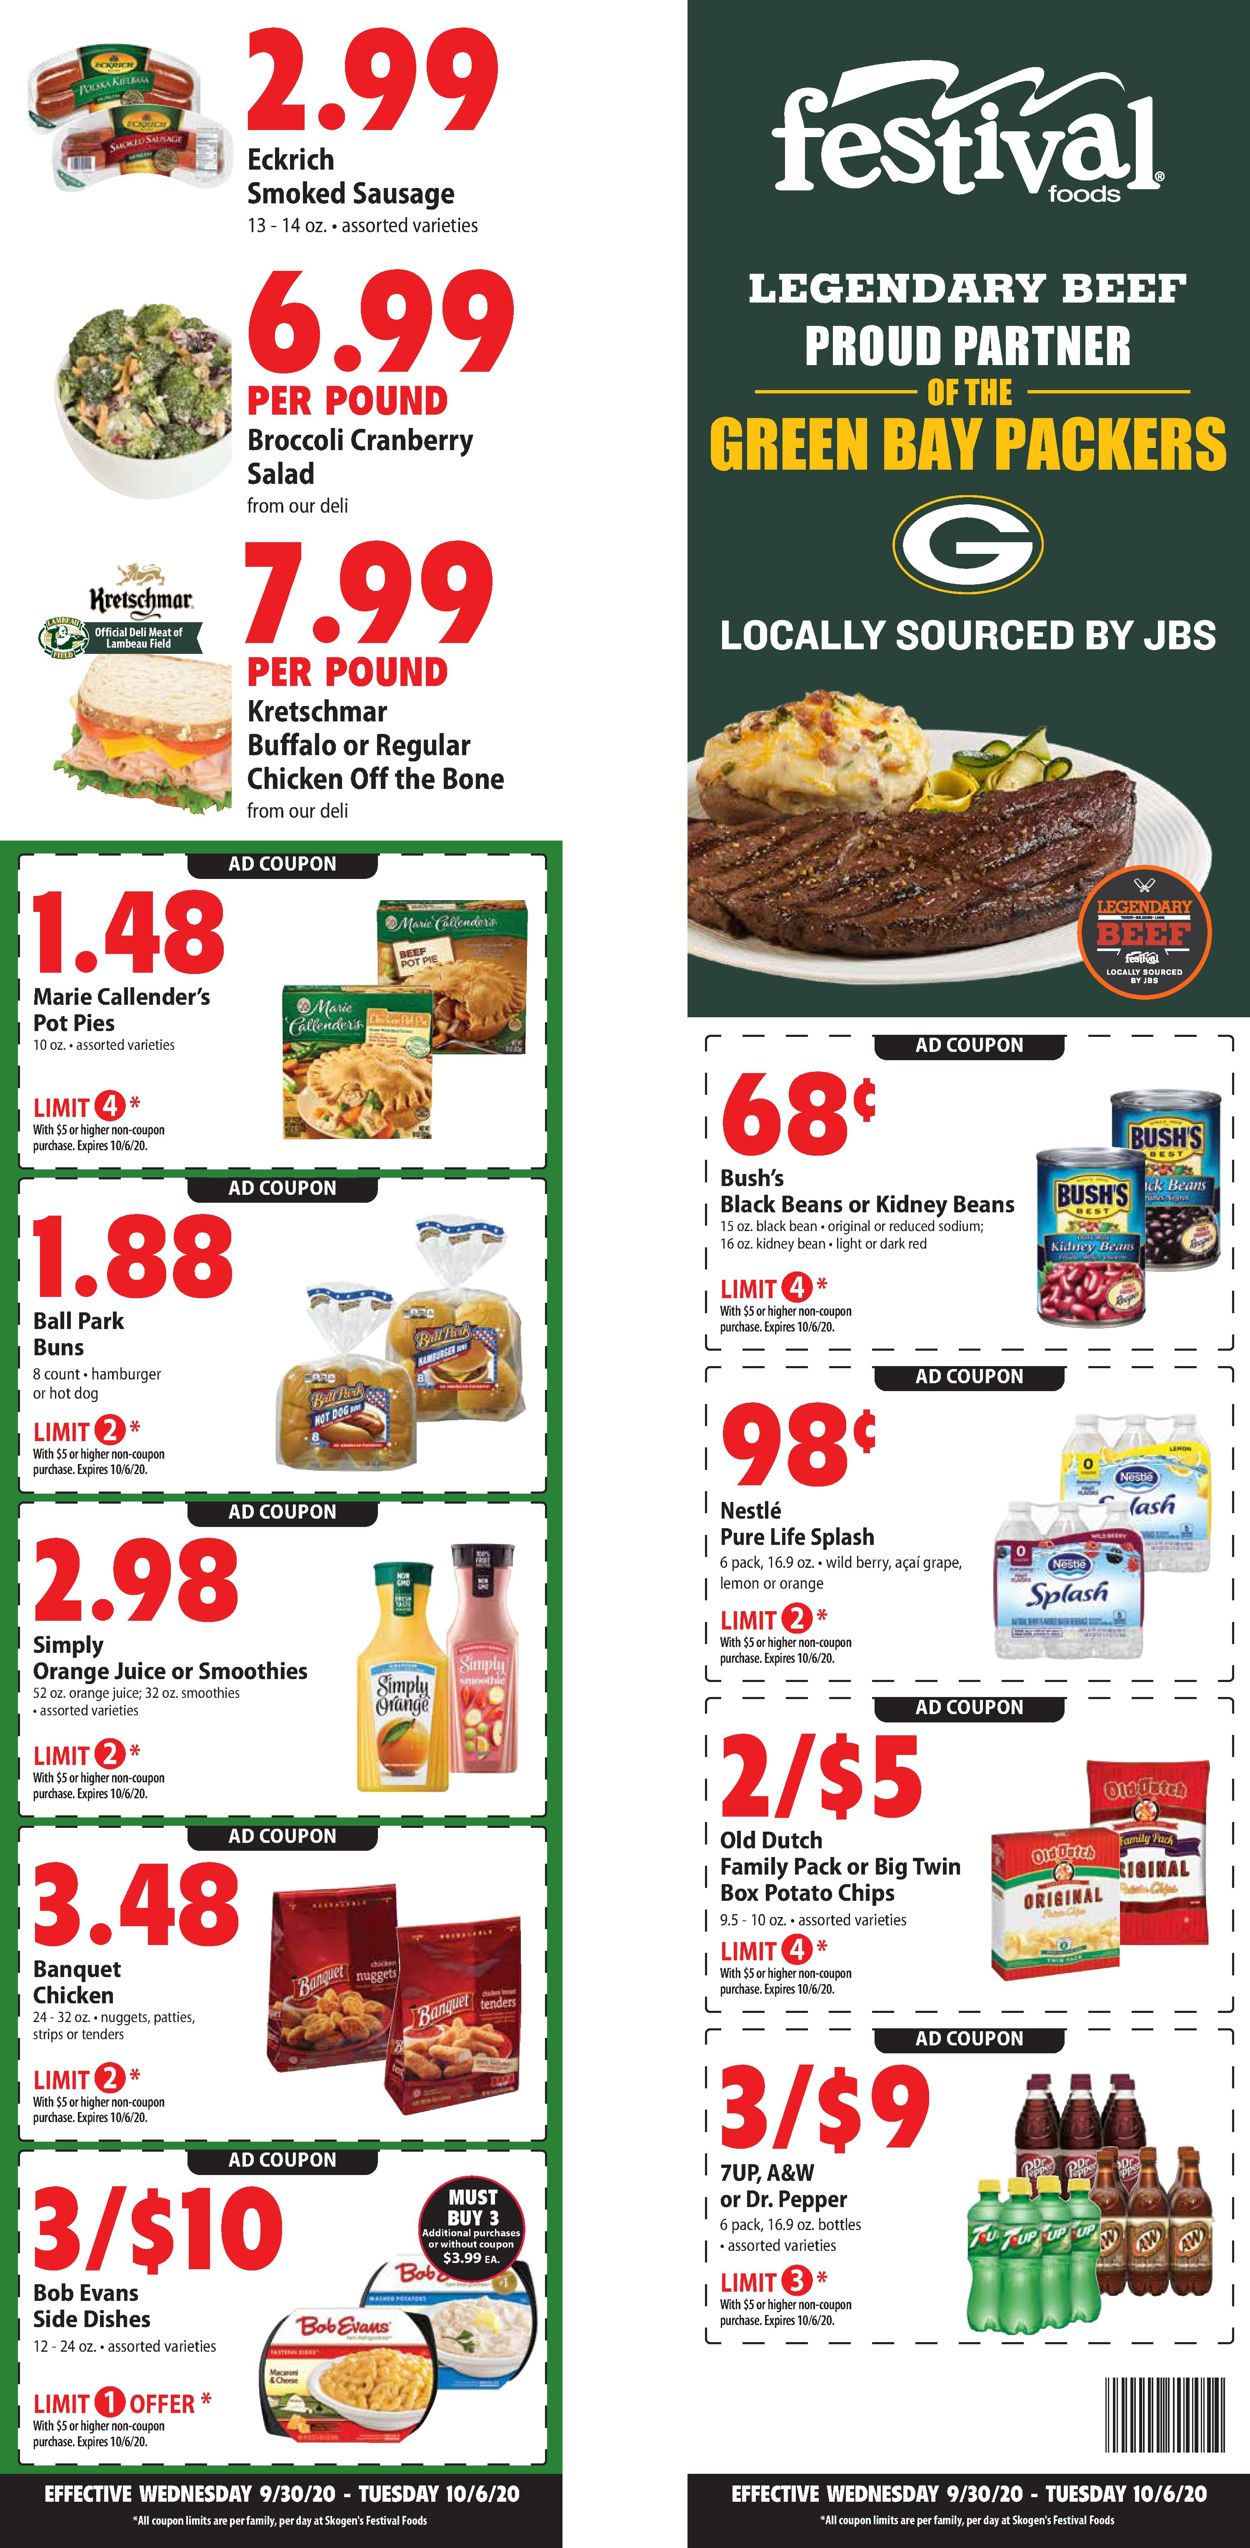 Festival Foods Current weekly ad 09/30 10/06/2020